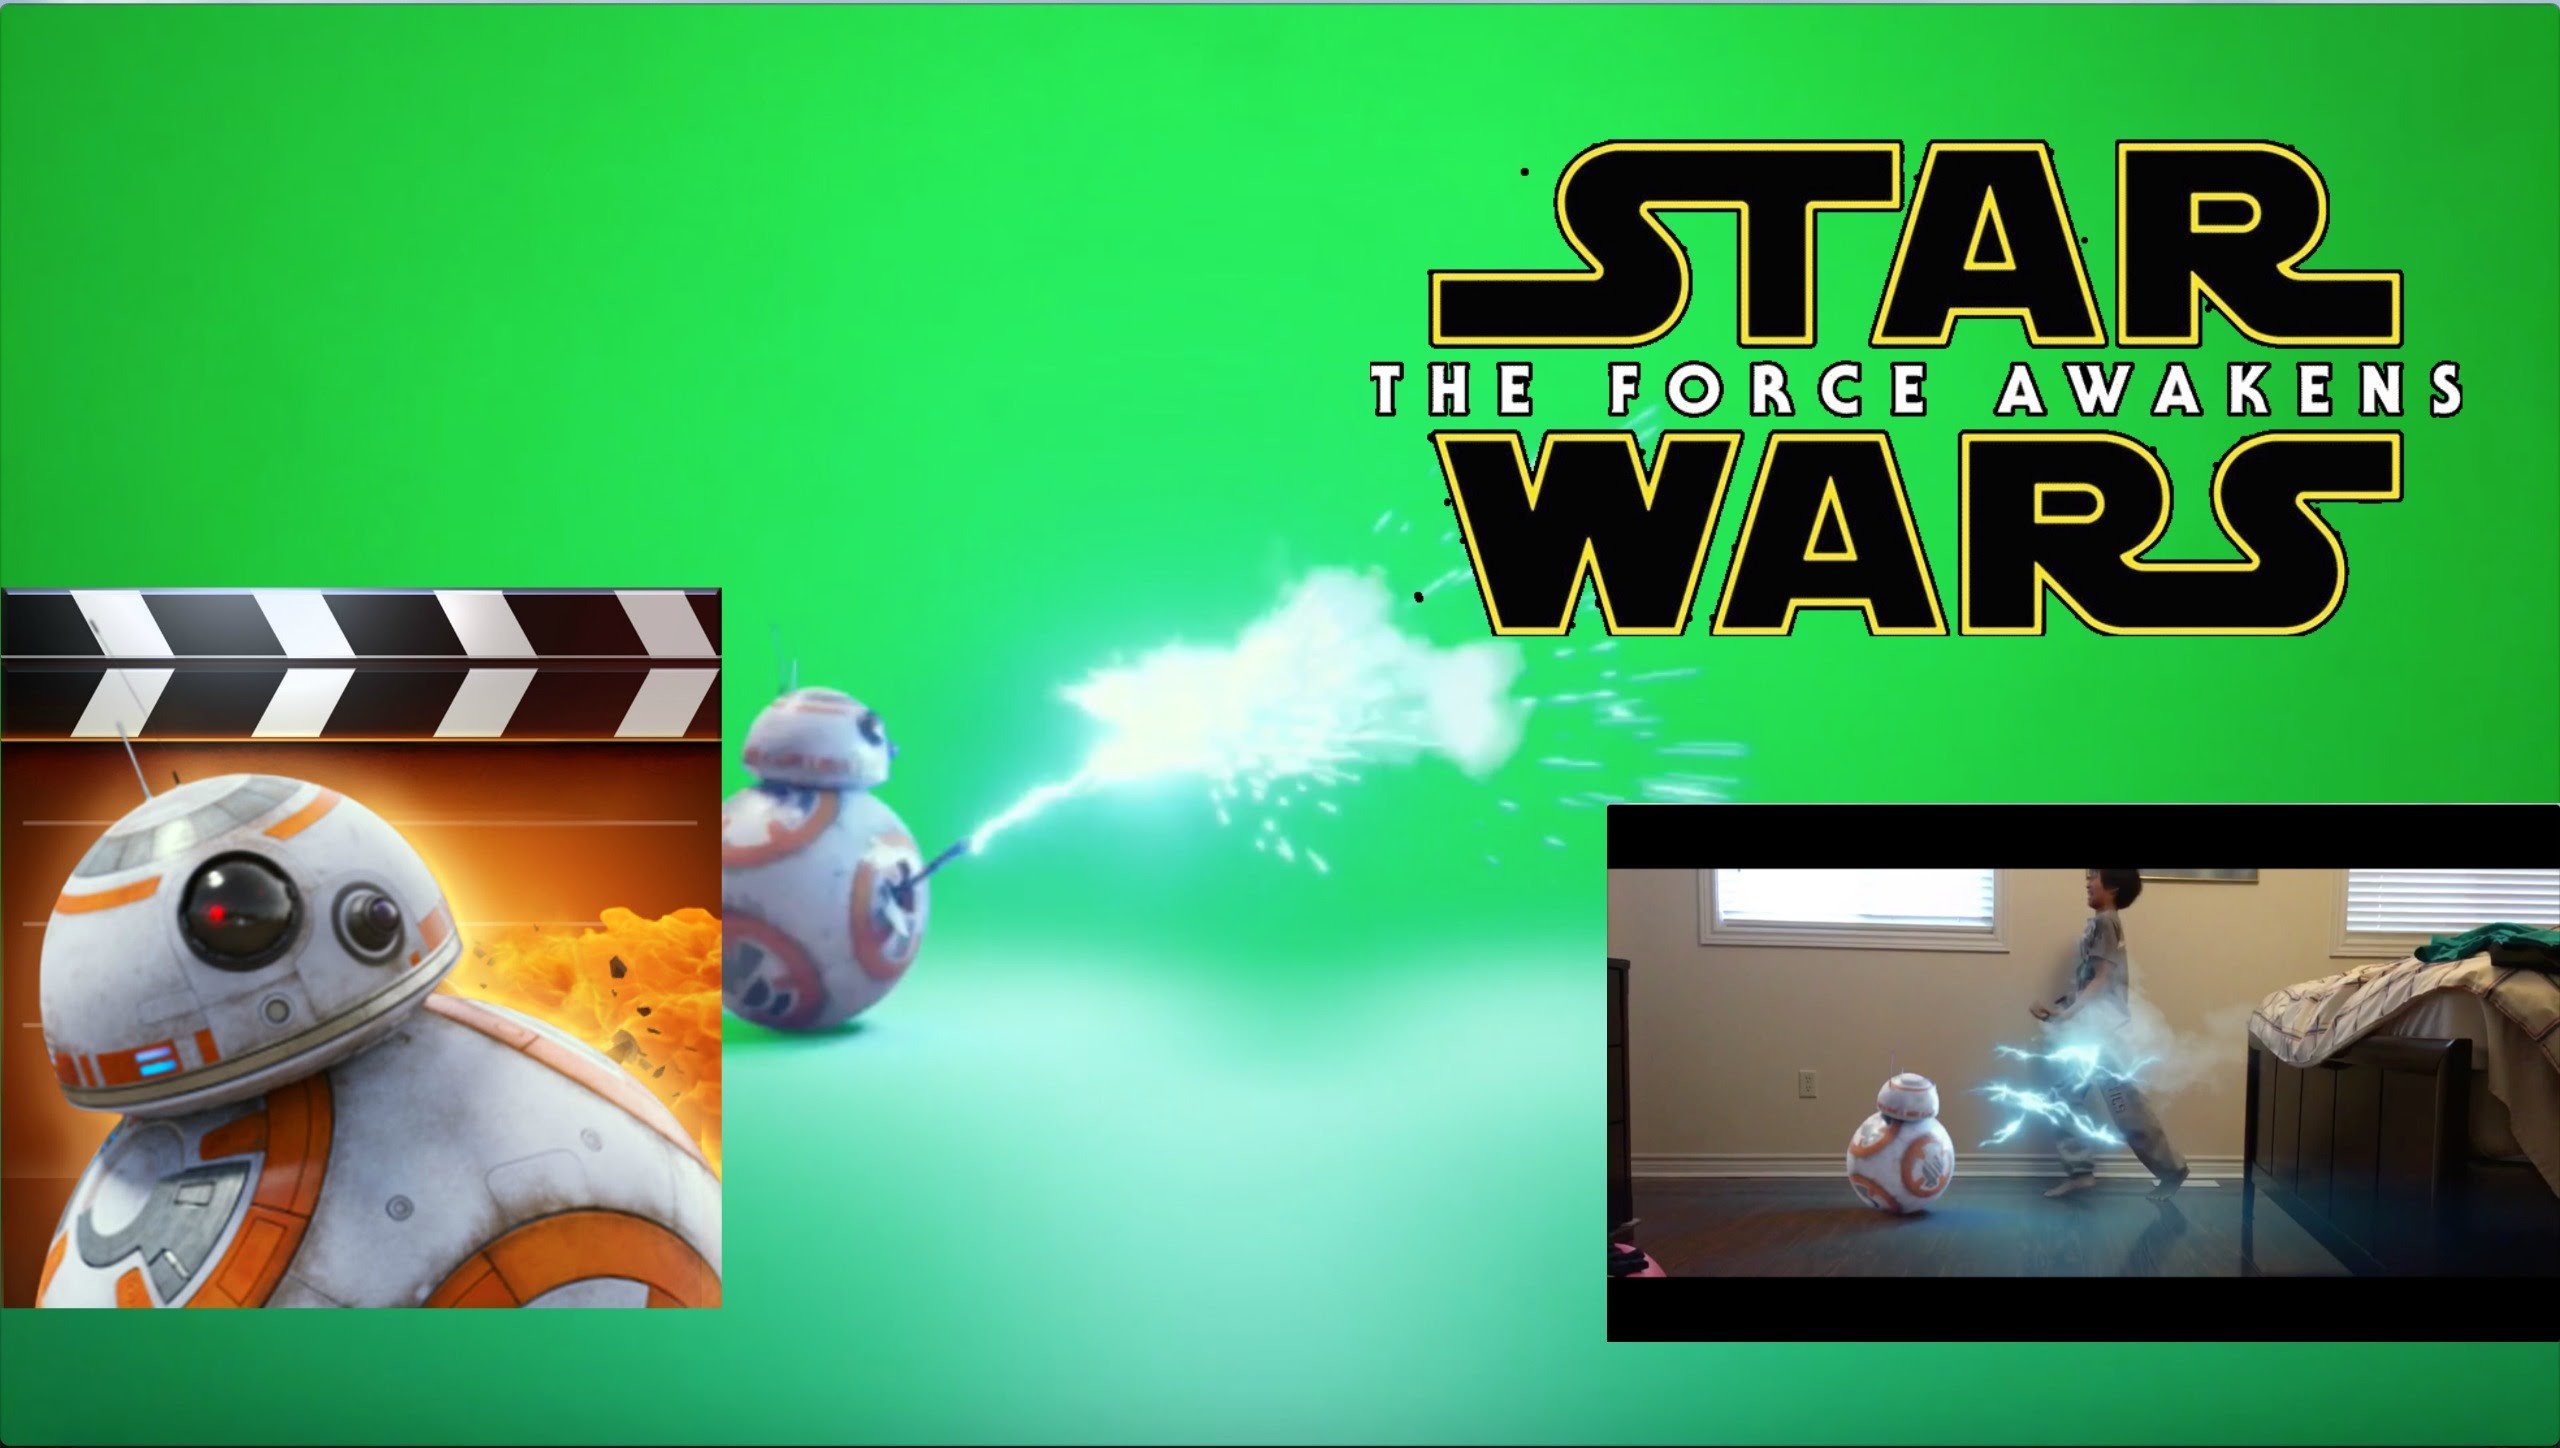 2560x1448 STAR WARS: the force awakens - Action Movie FX (Green Screen) - YouTube